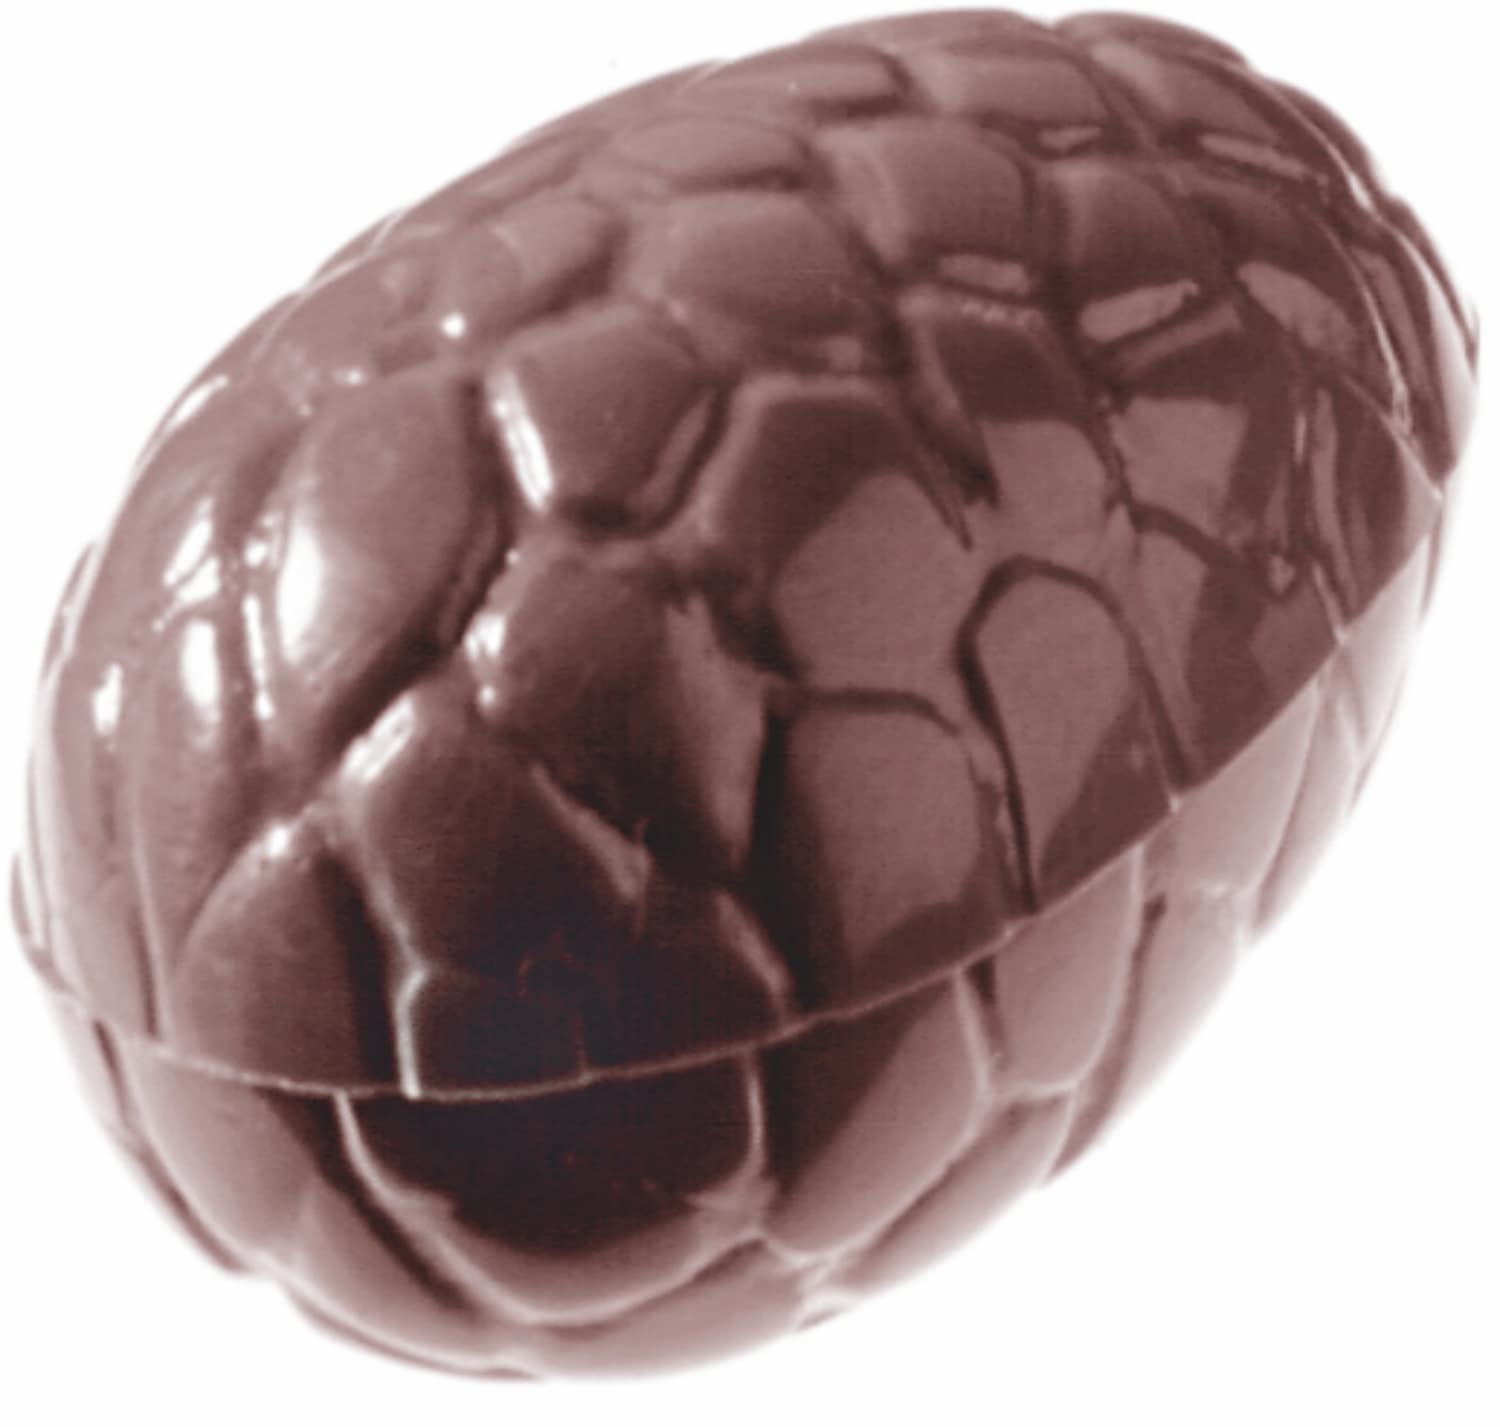 Chocolate mould "Easter egg" 421050 421050